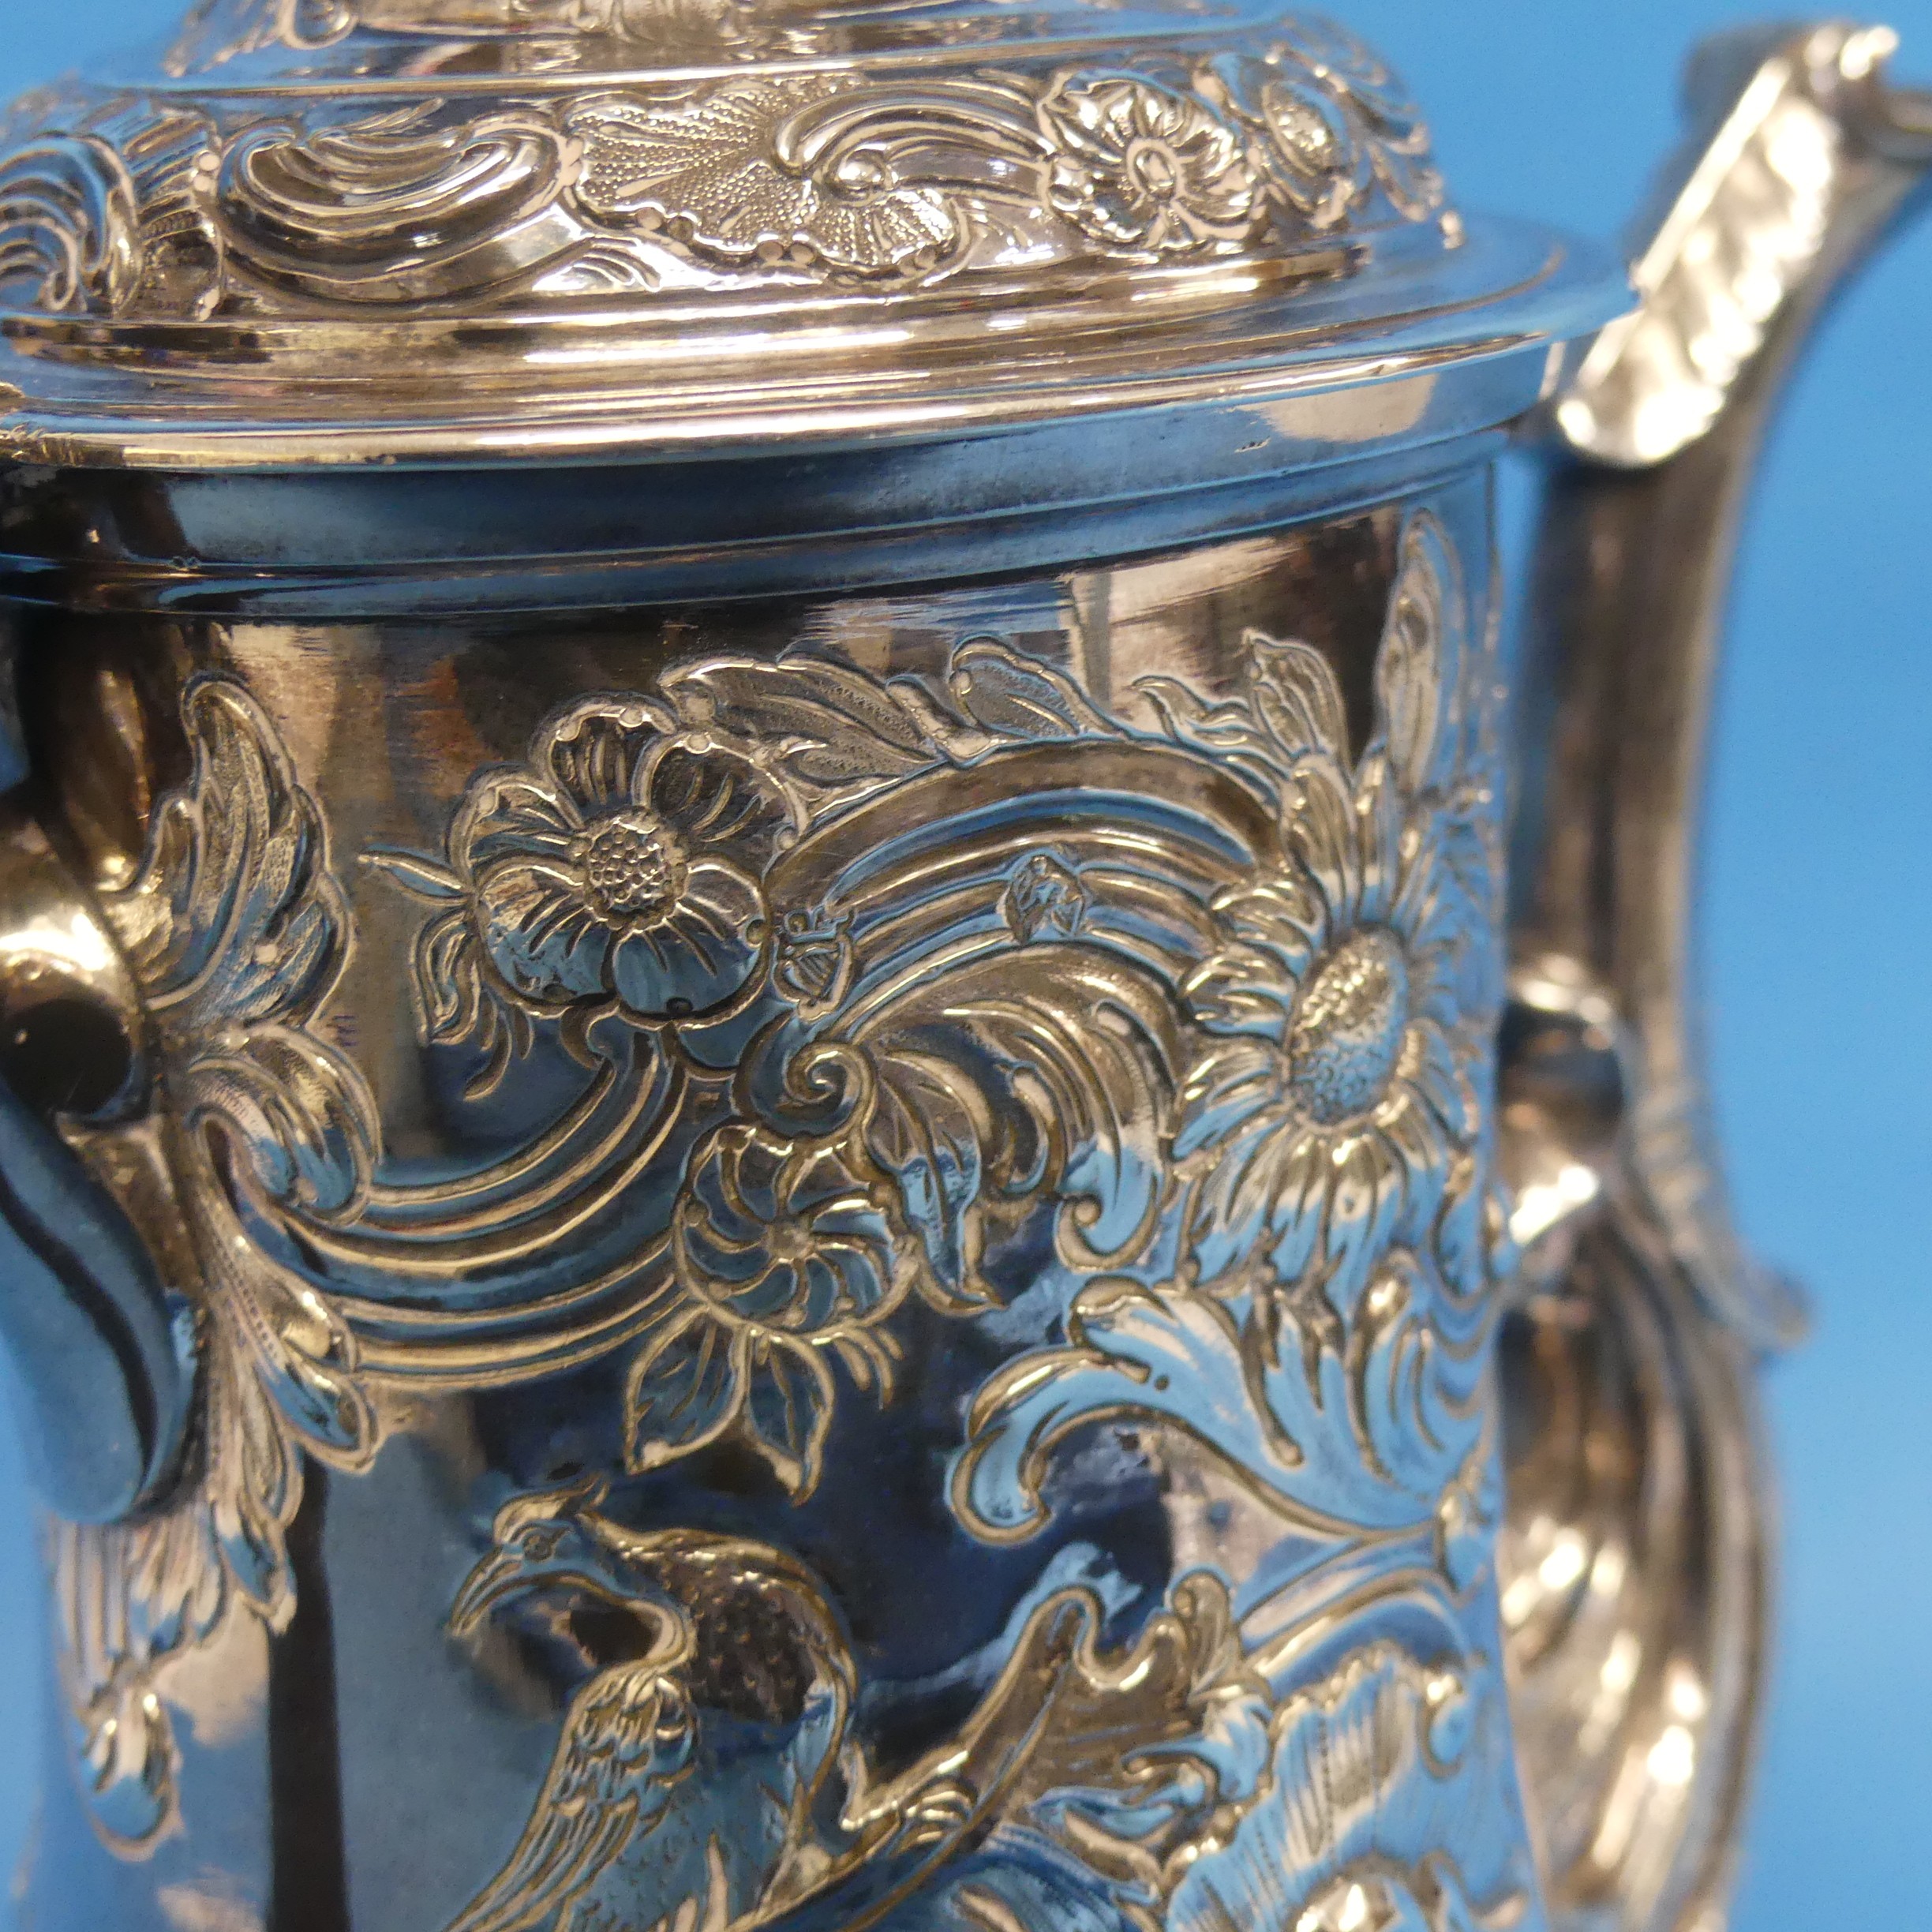 An 18thC Irish silver Coffee Pot, hallmarked for Dublin and with Hibernia mark, no makers mark or - Image 8 of 9